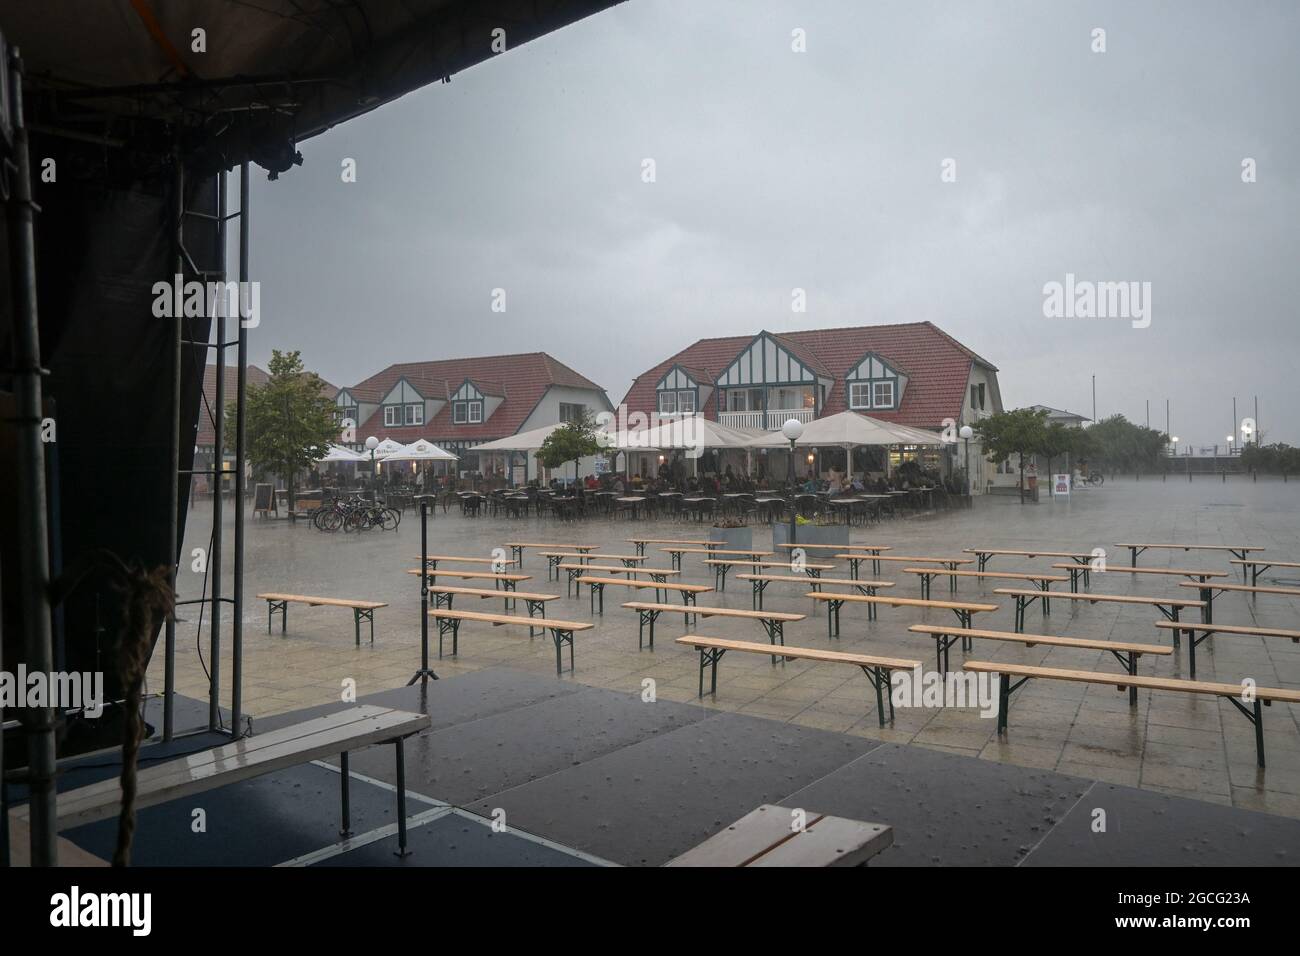 RERIK, GERMANY, 07 August 2021: Empty benches in the rain seen from the stage, canceled theater performance and entertainment in the tourist resort of Stock Photo